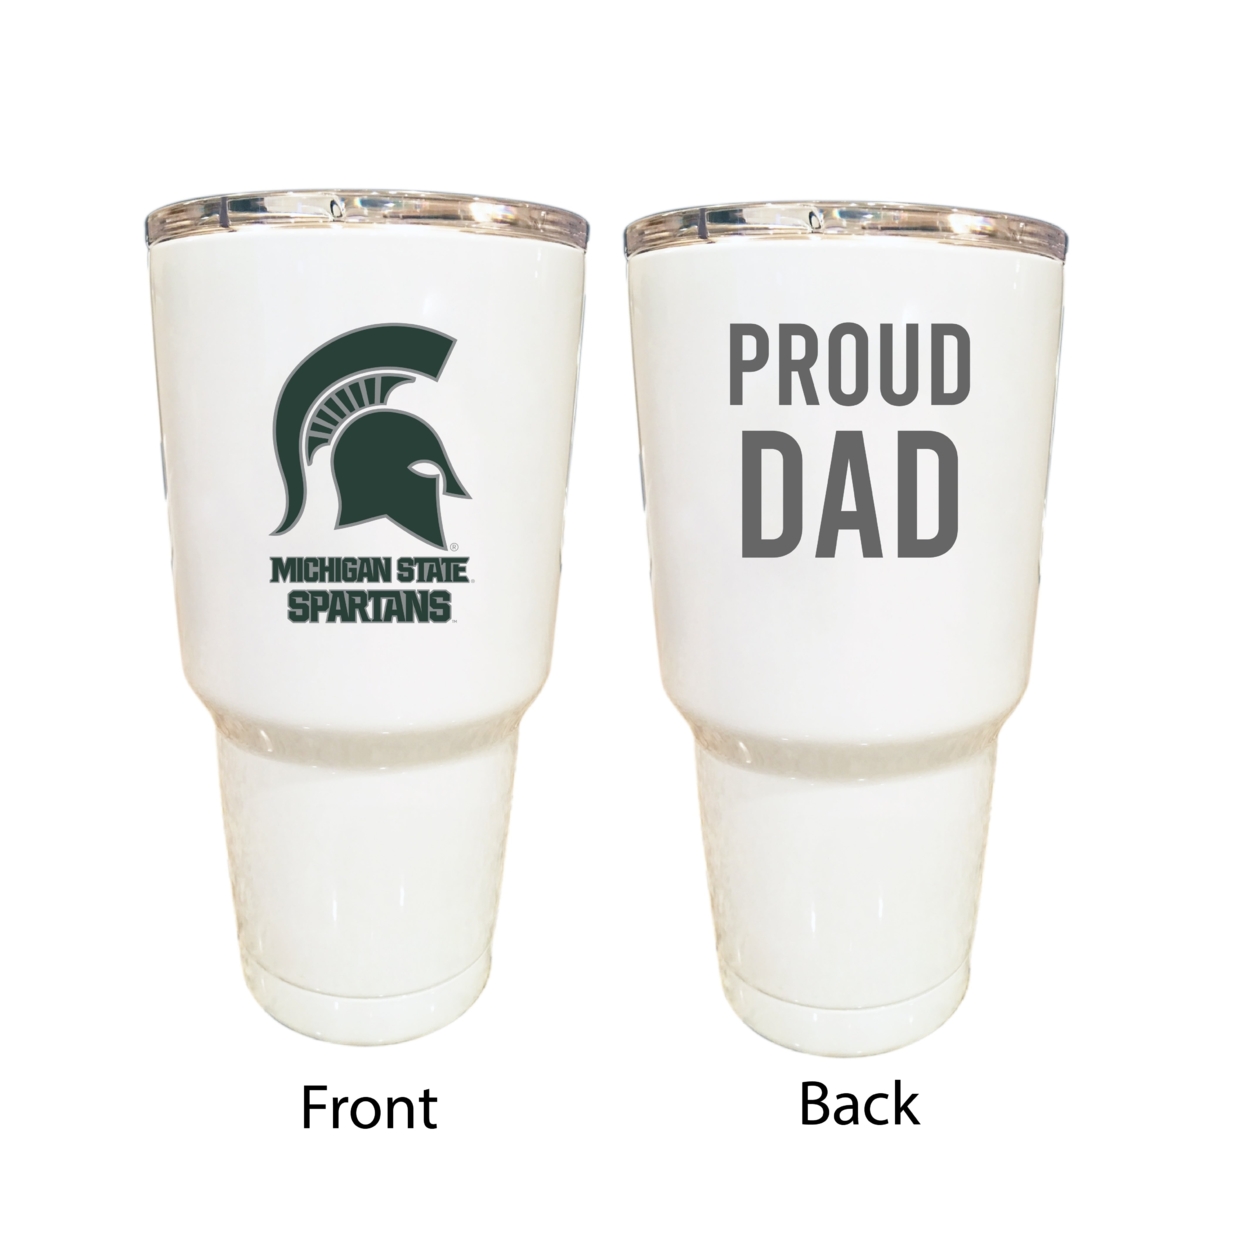 Michigan State Spartans Proud Dad 24 Oz Insulated Stainless Steel Tumblers Choose Your Color.